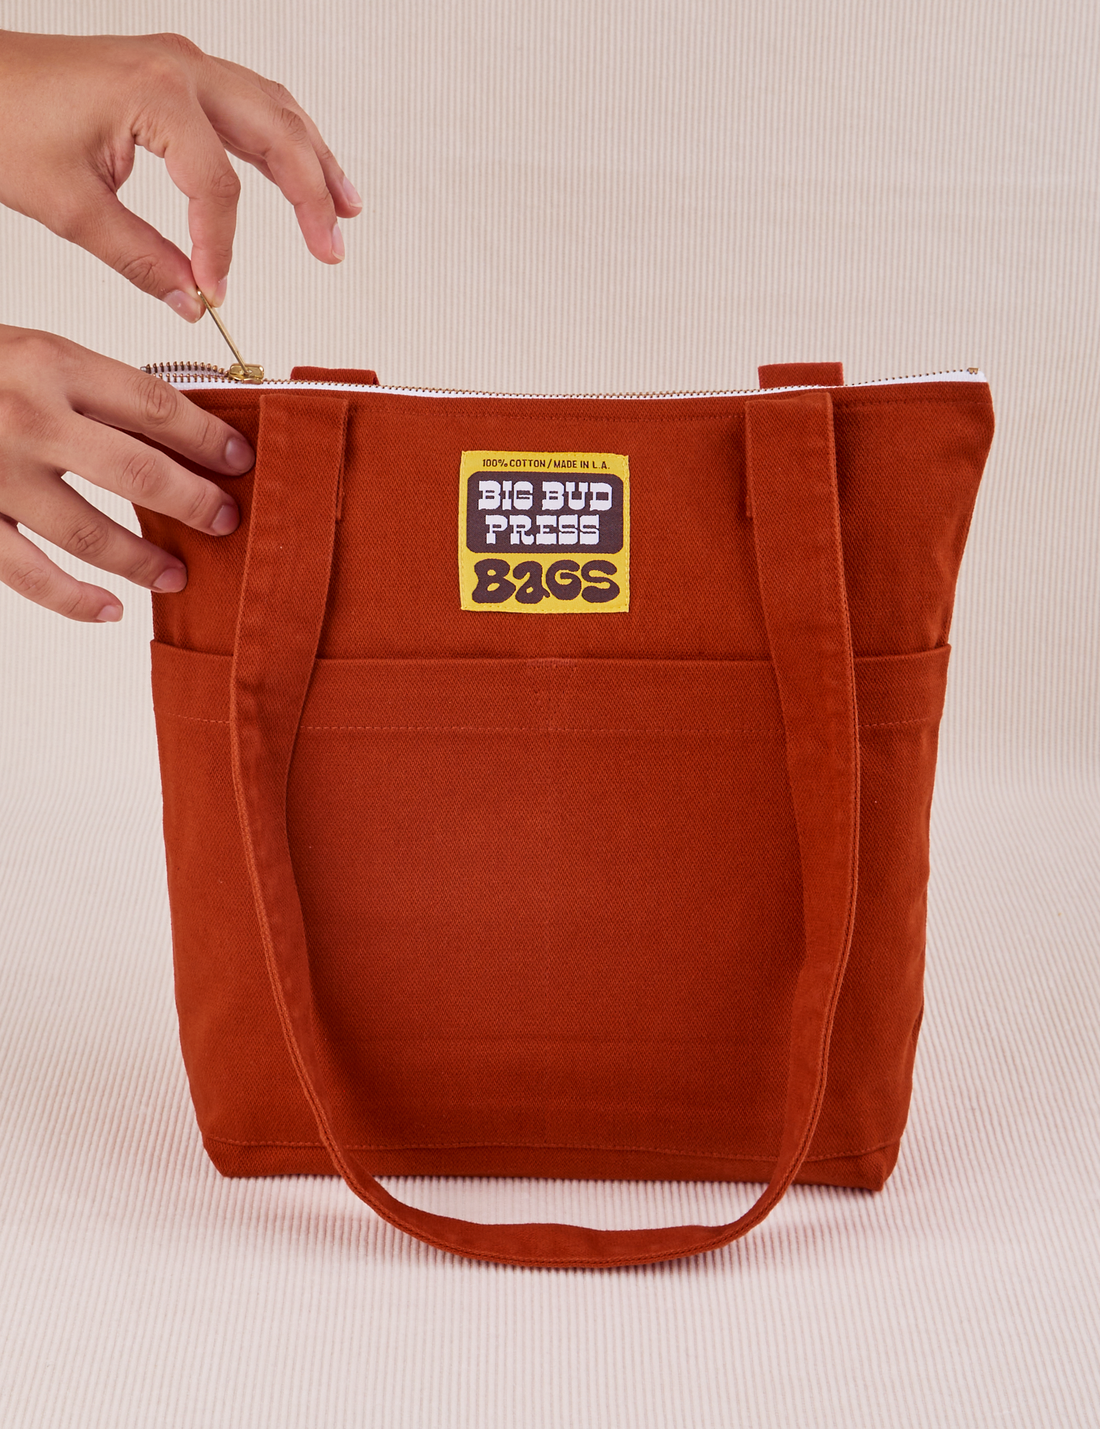 Over-Shoulder Zip Mini Tote in Paprika with model holding zipper